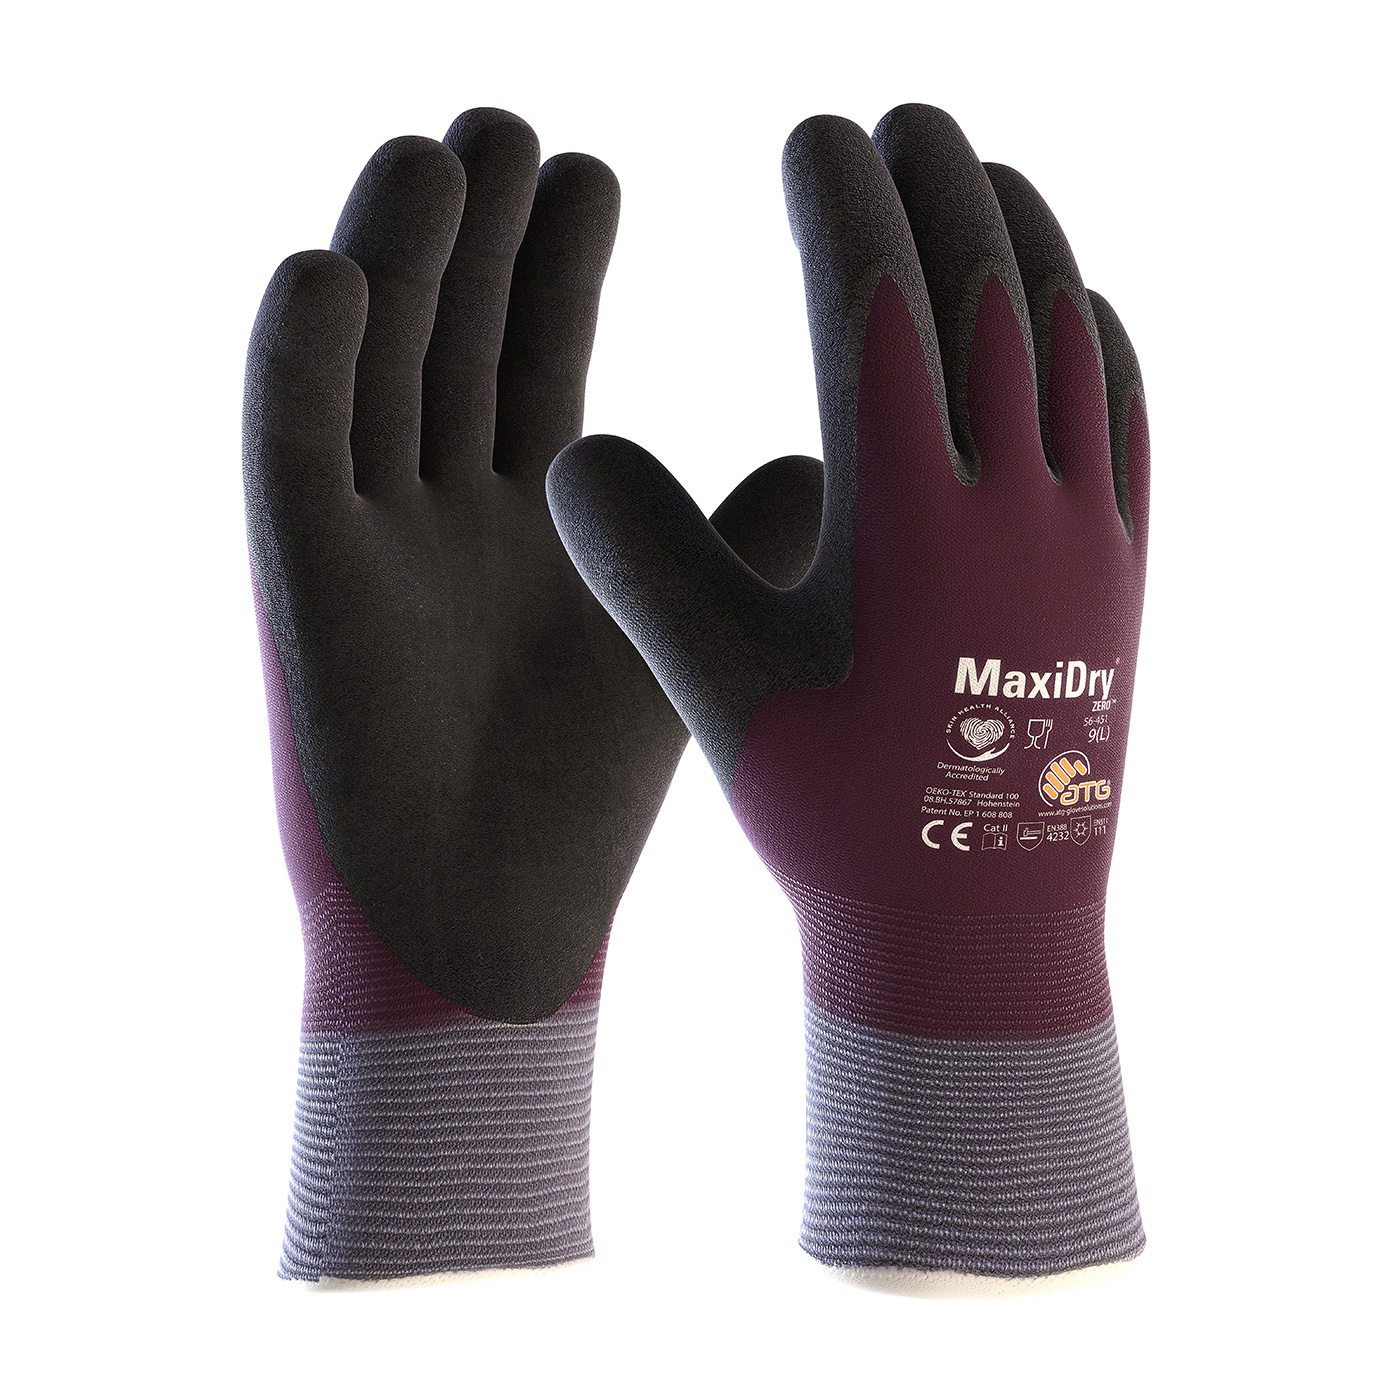 PIP 56-451/XL MaxiDry Zero Seamless Knit Nylon/Lycra Glove with Thermal Lining and Double-Dipped Nitrile Coated MicroFoam Grip on Full Hand - X-Large PID-56451XL